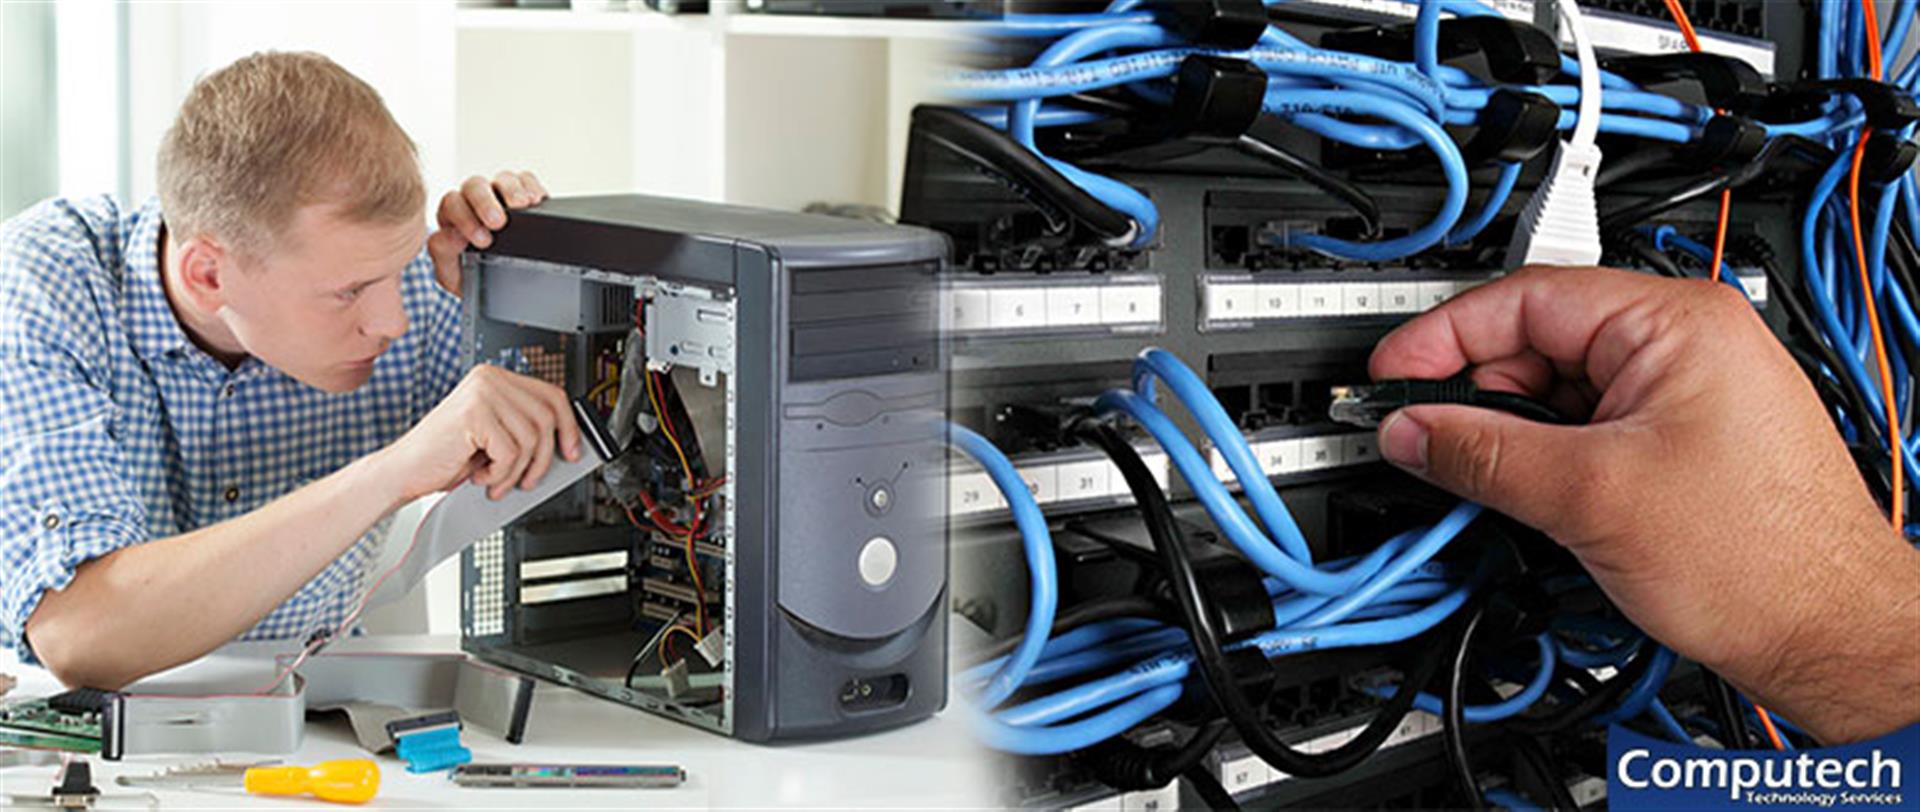 Parker Arizona On-Site PC & Printer Repair, Networking, Telecom and High Speed Data Wiring Services